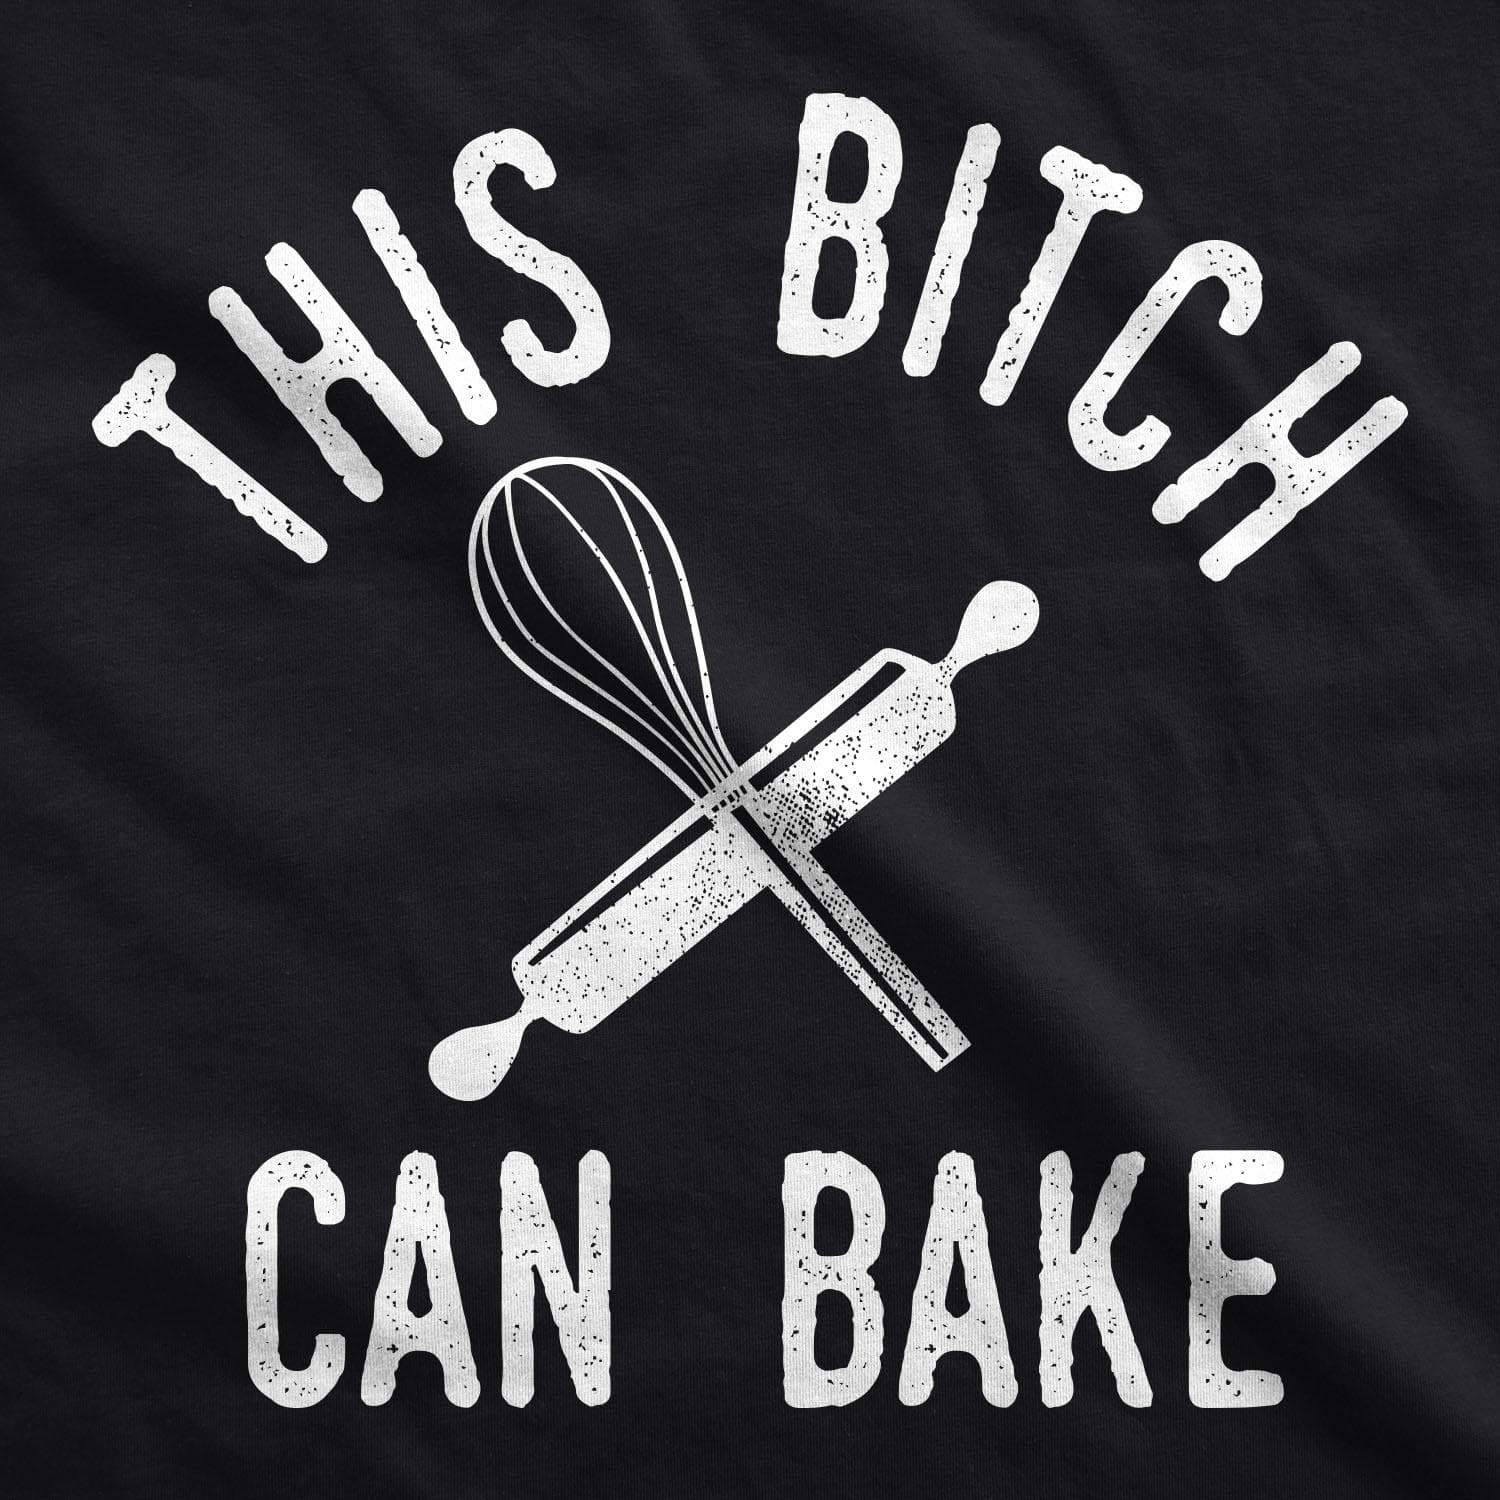 This Bitch Can Bake Cookout Apron - Crazy Dog T-Shirts